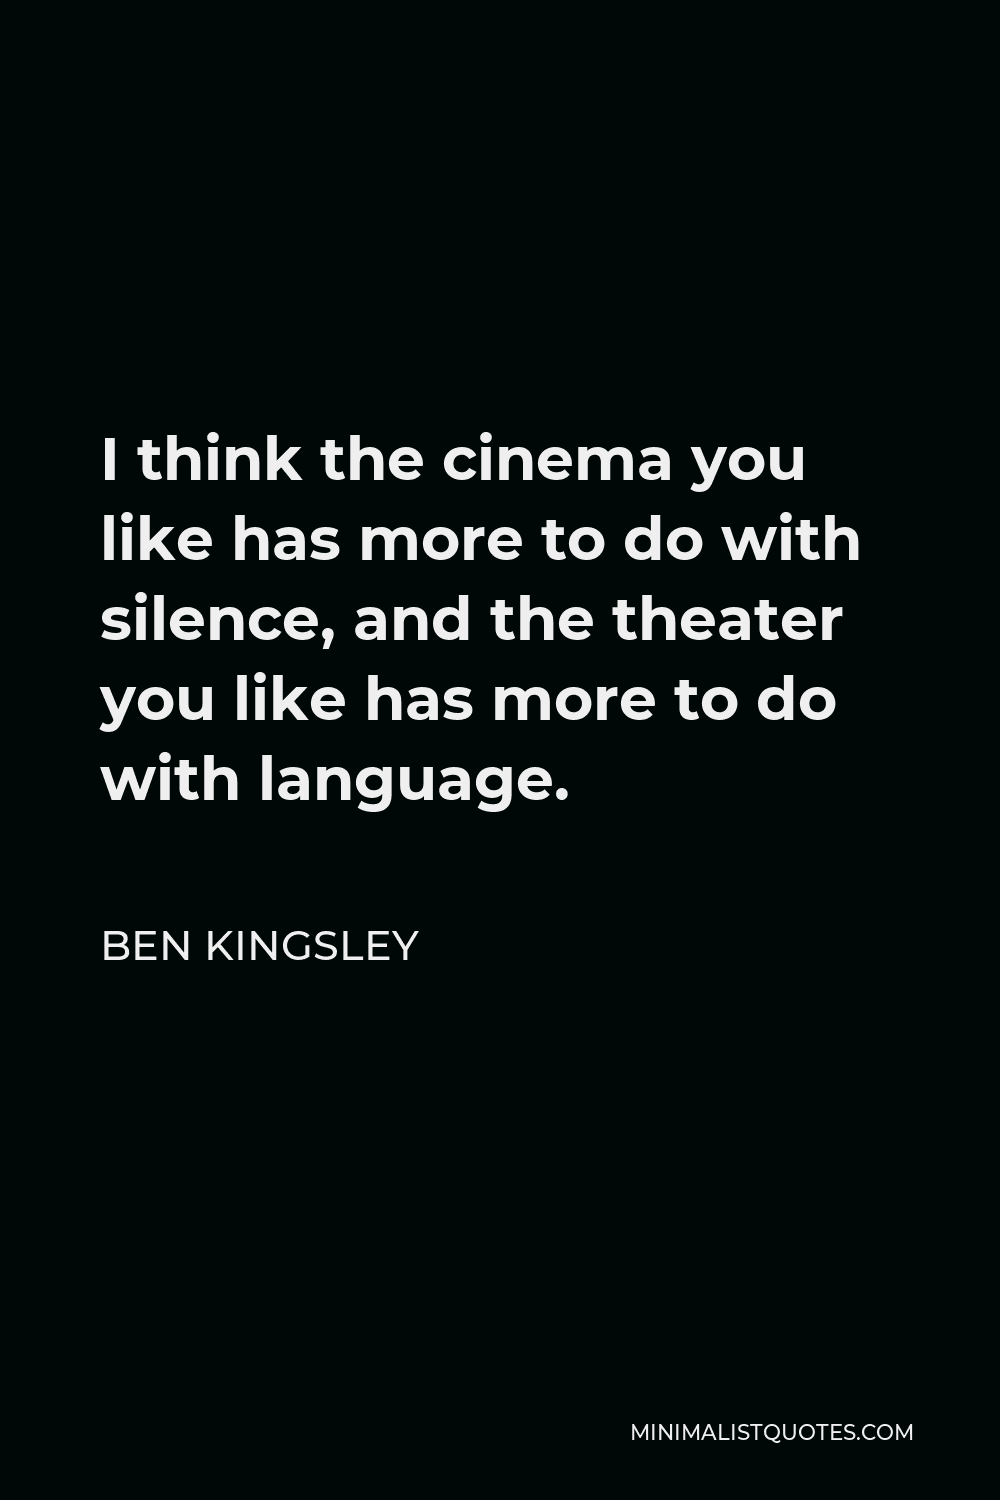 Ben Kingsley Quote - I think the cinema you like has more to do with silence, and the theater you like has more to do with language.